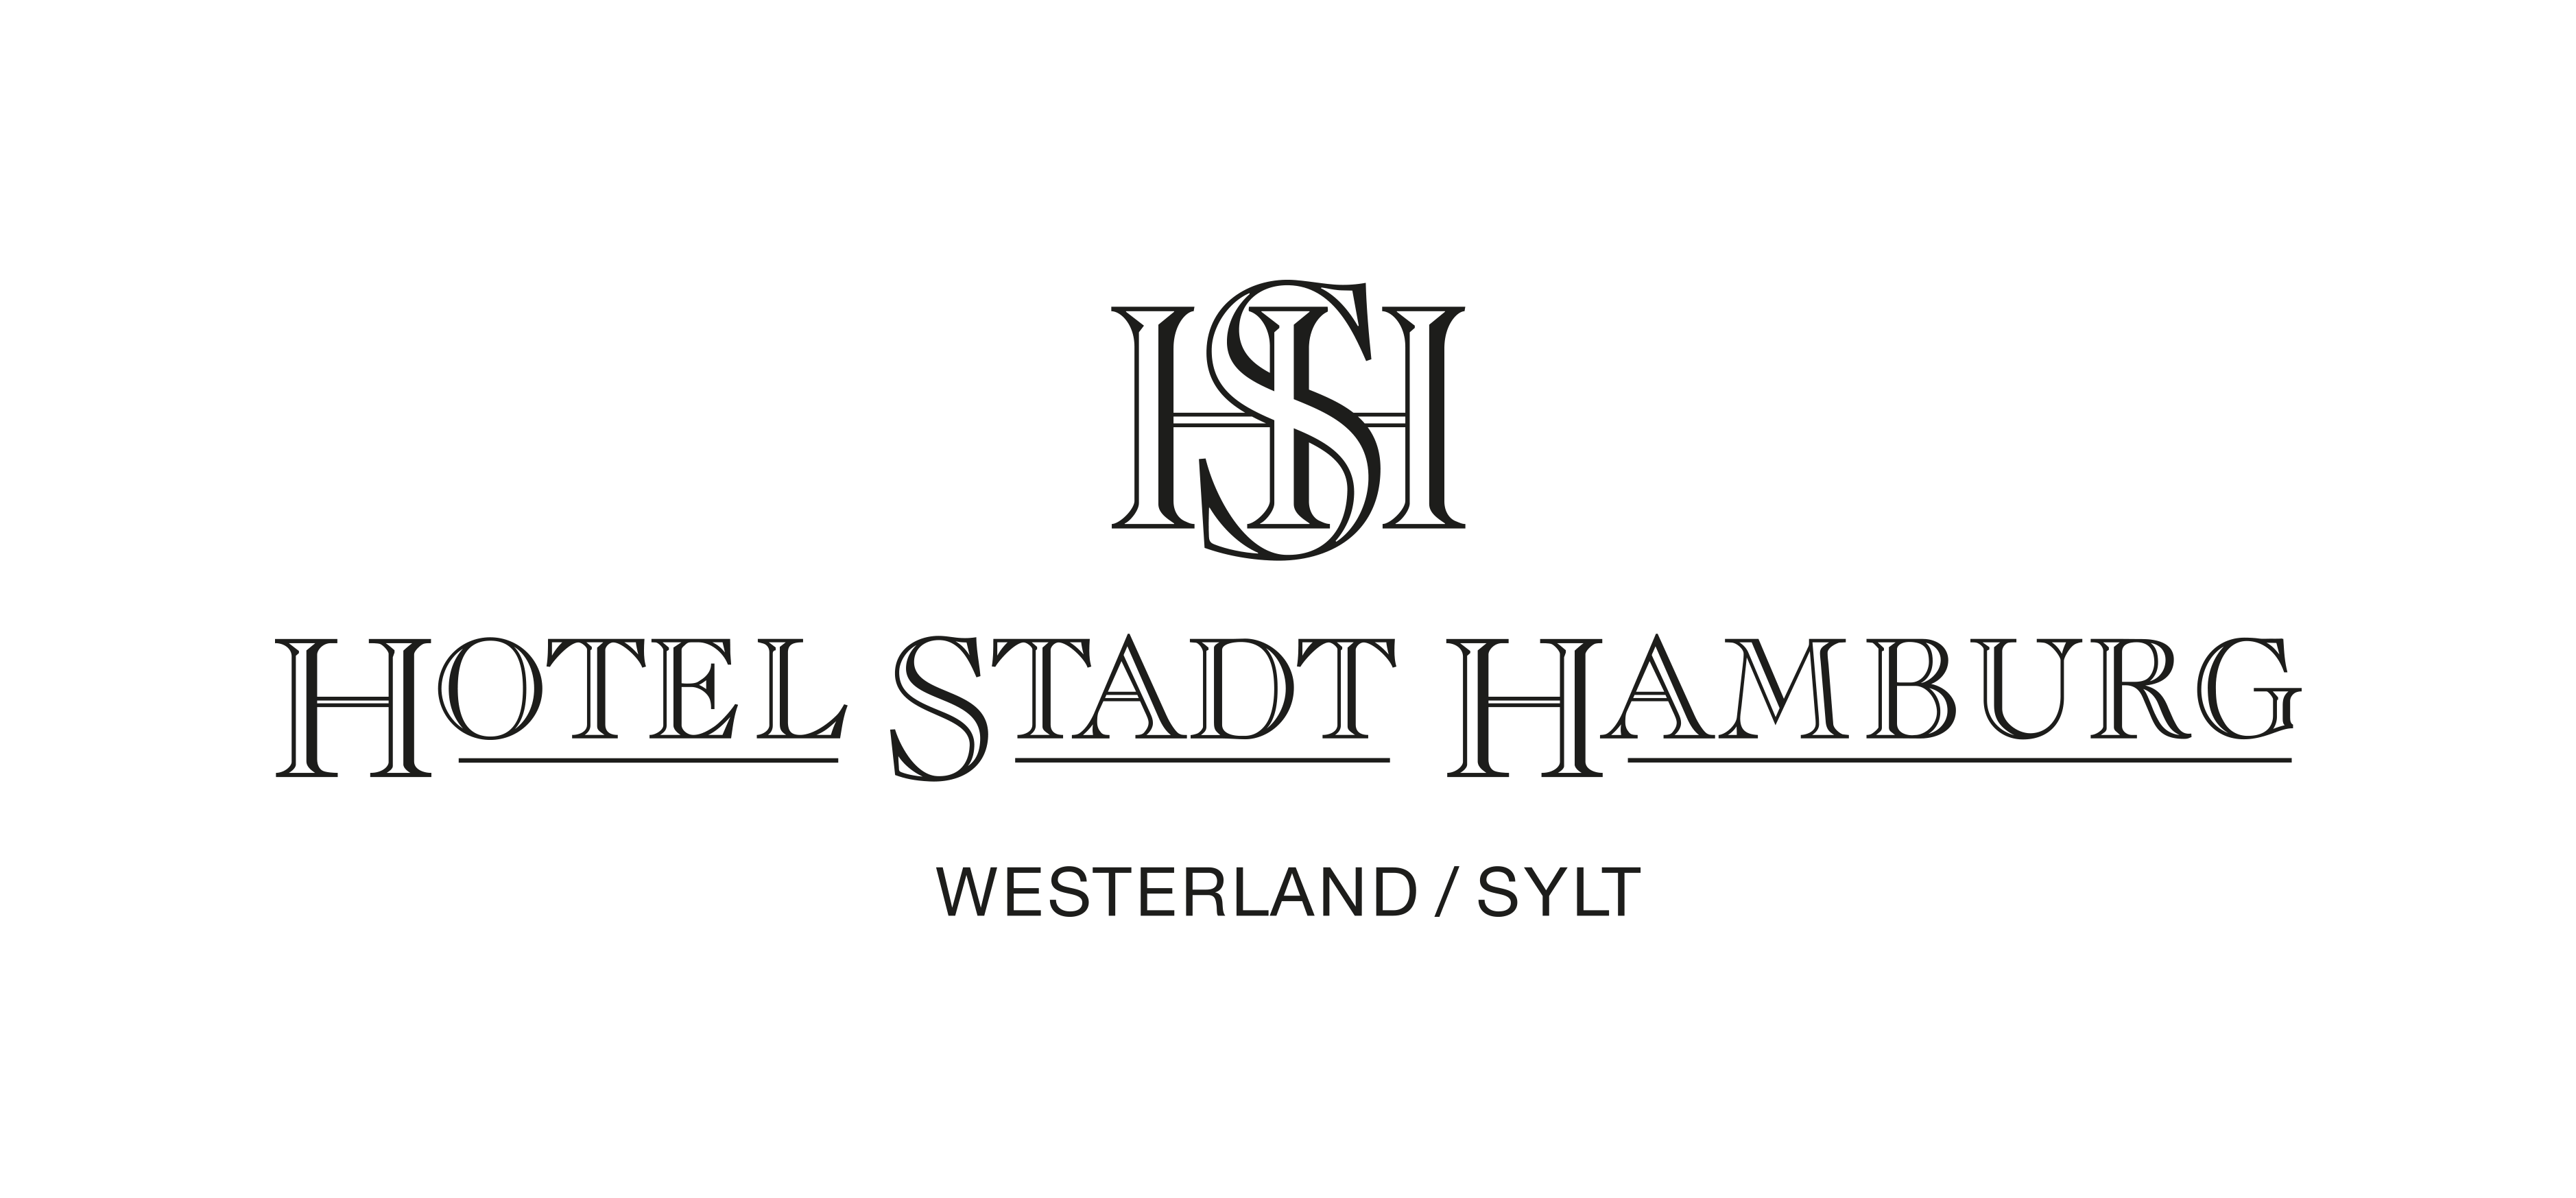 Monochromatic logo of Hotel Stadt Hamburg reflecting luxury and tradition, surrounded by text, inclu